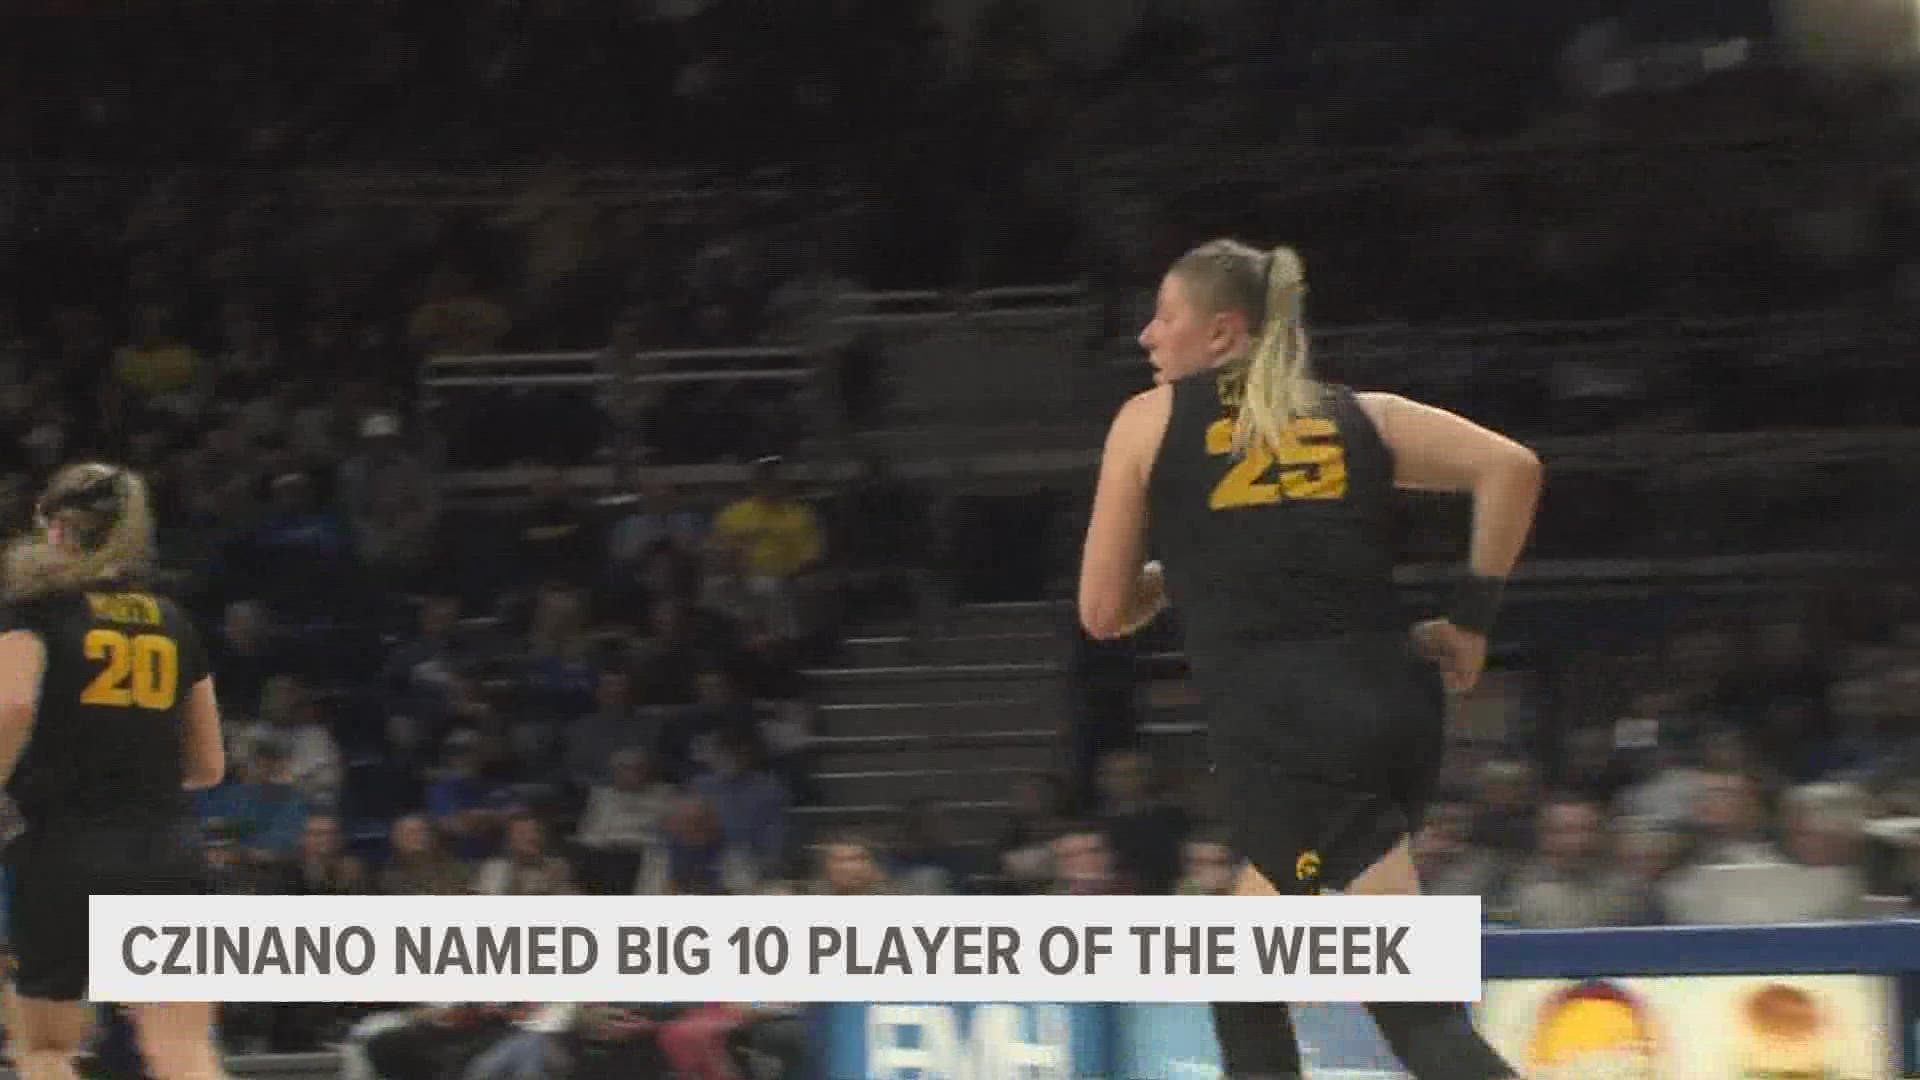 Monika Czinano was named Big 10 Player of the Week after leading all scoring with 36 points in their thrilling over time win over Drake on Sunday.